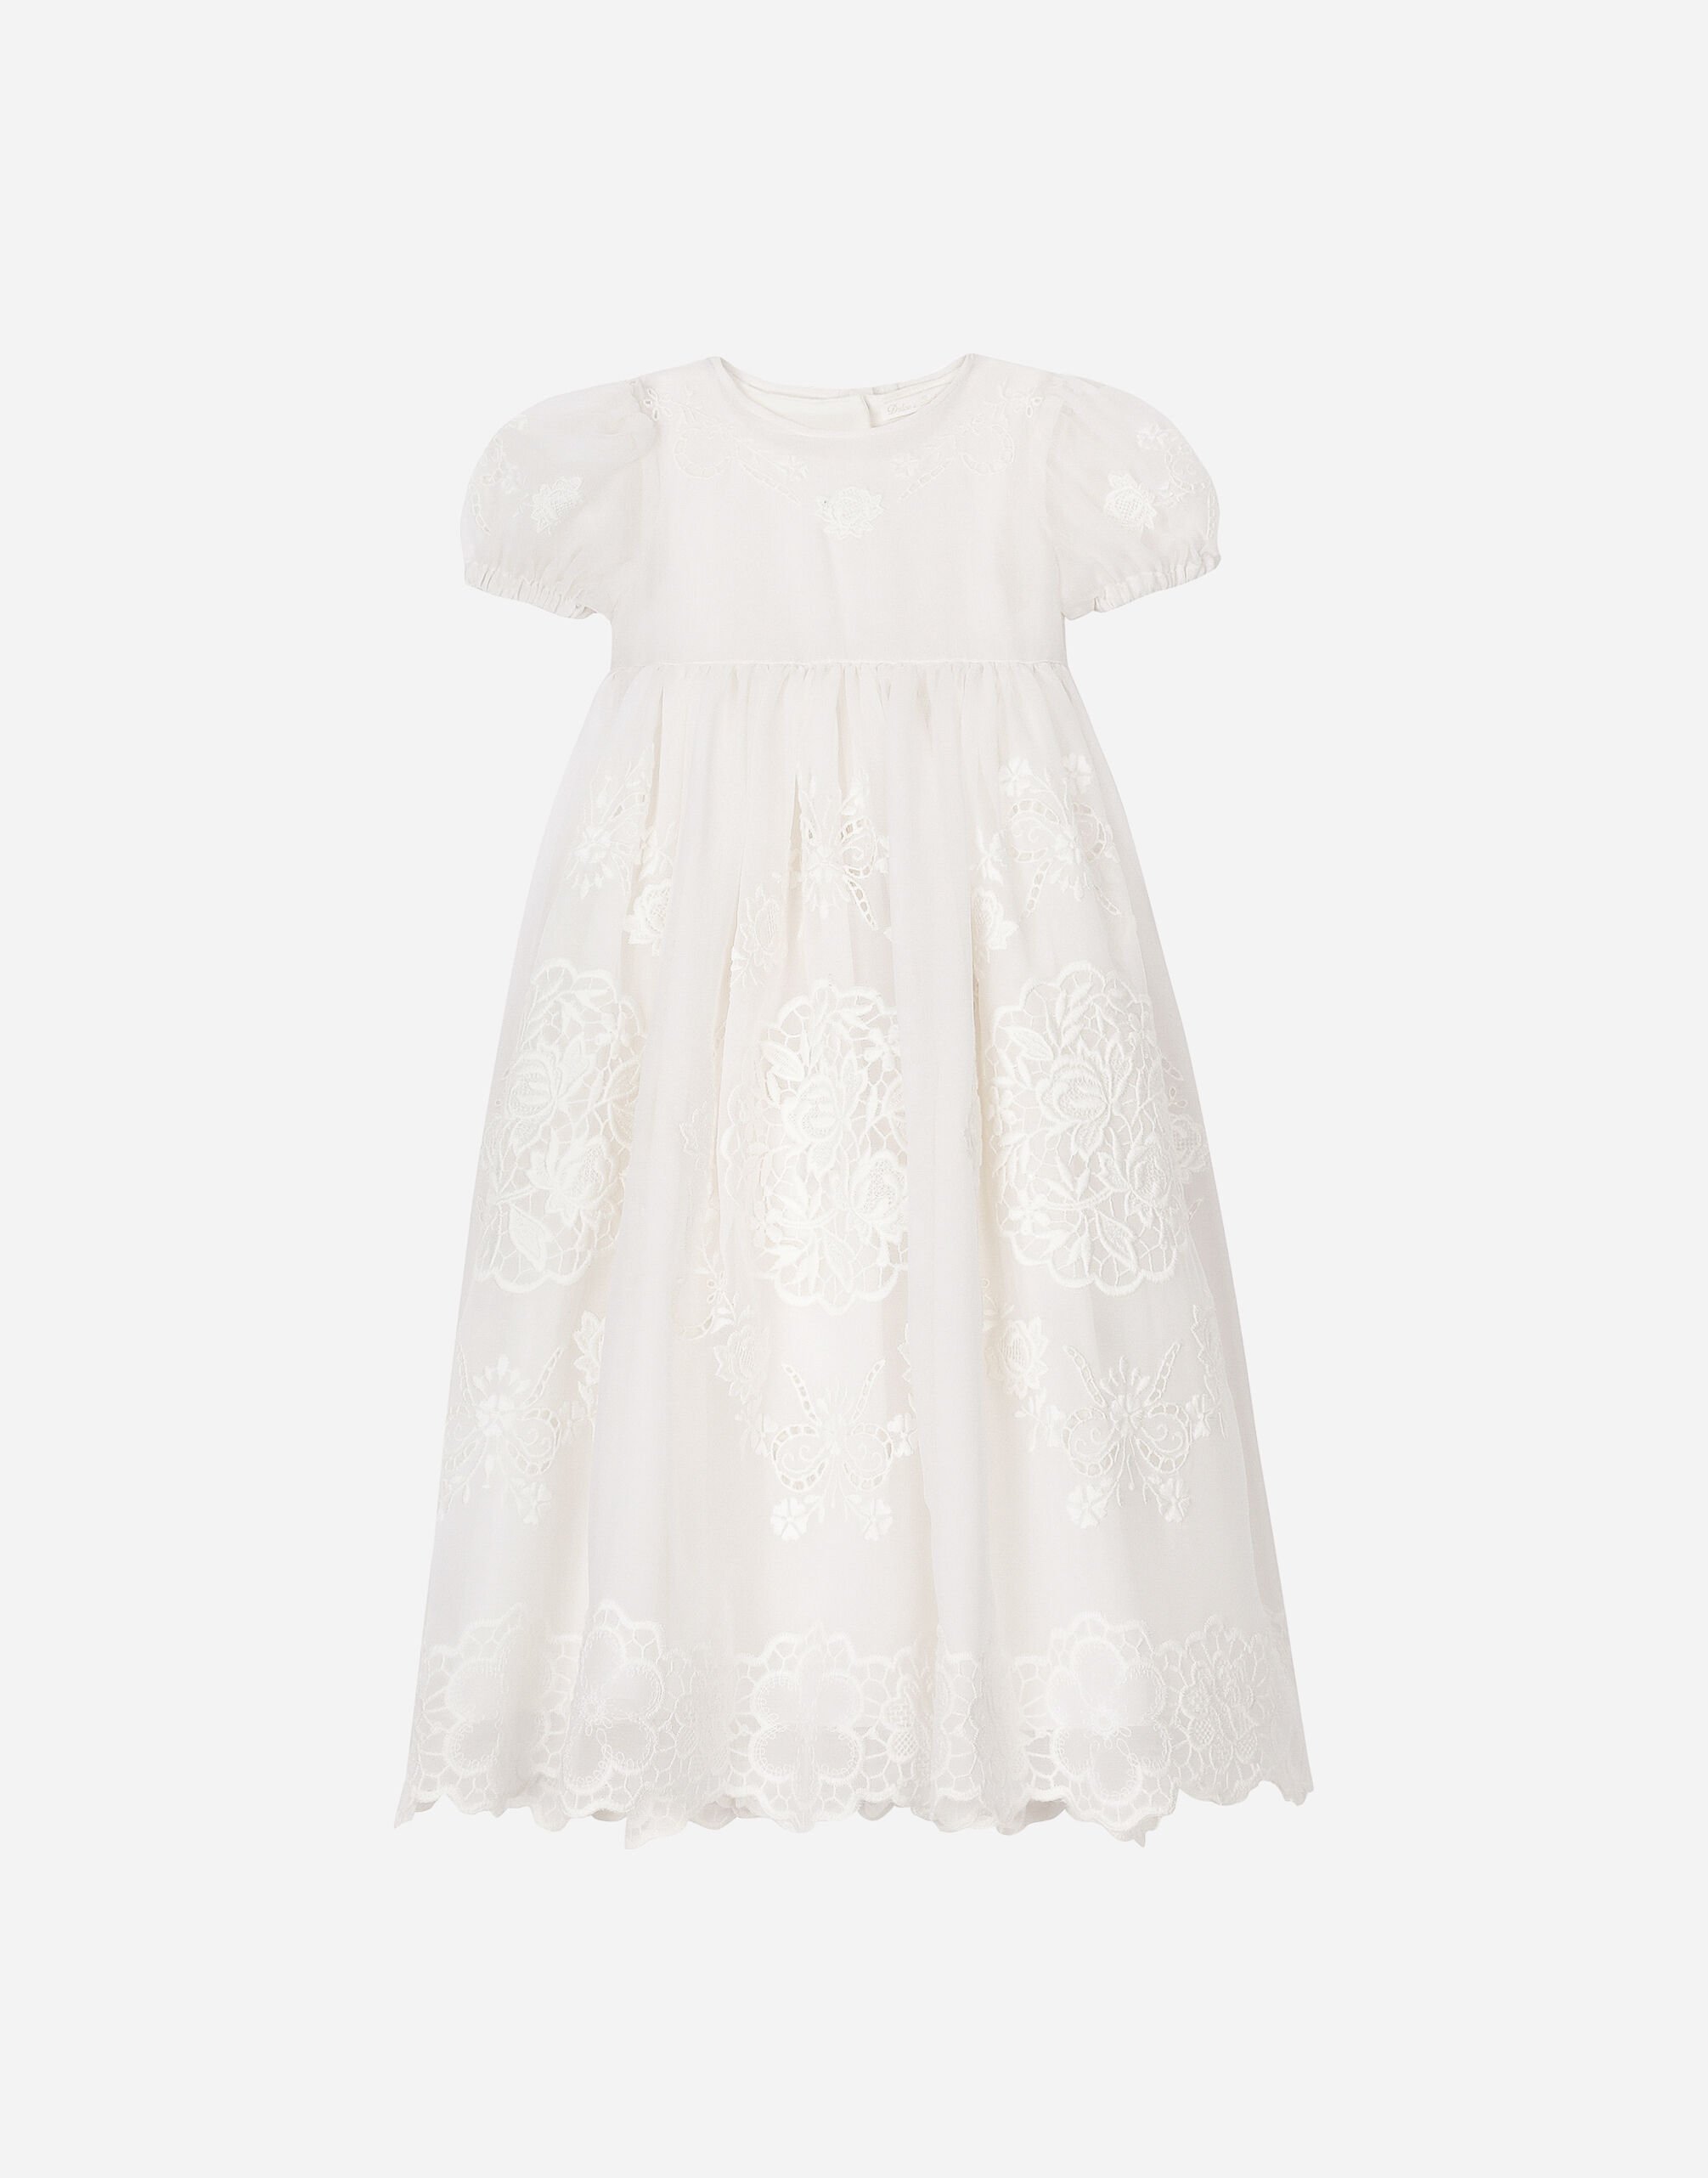 Dolce & Gabbana Empire-line embroidered chiffon christening dress with short sleeves Print L2JDZ1G7NUL